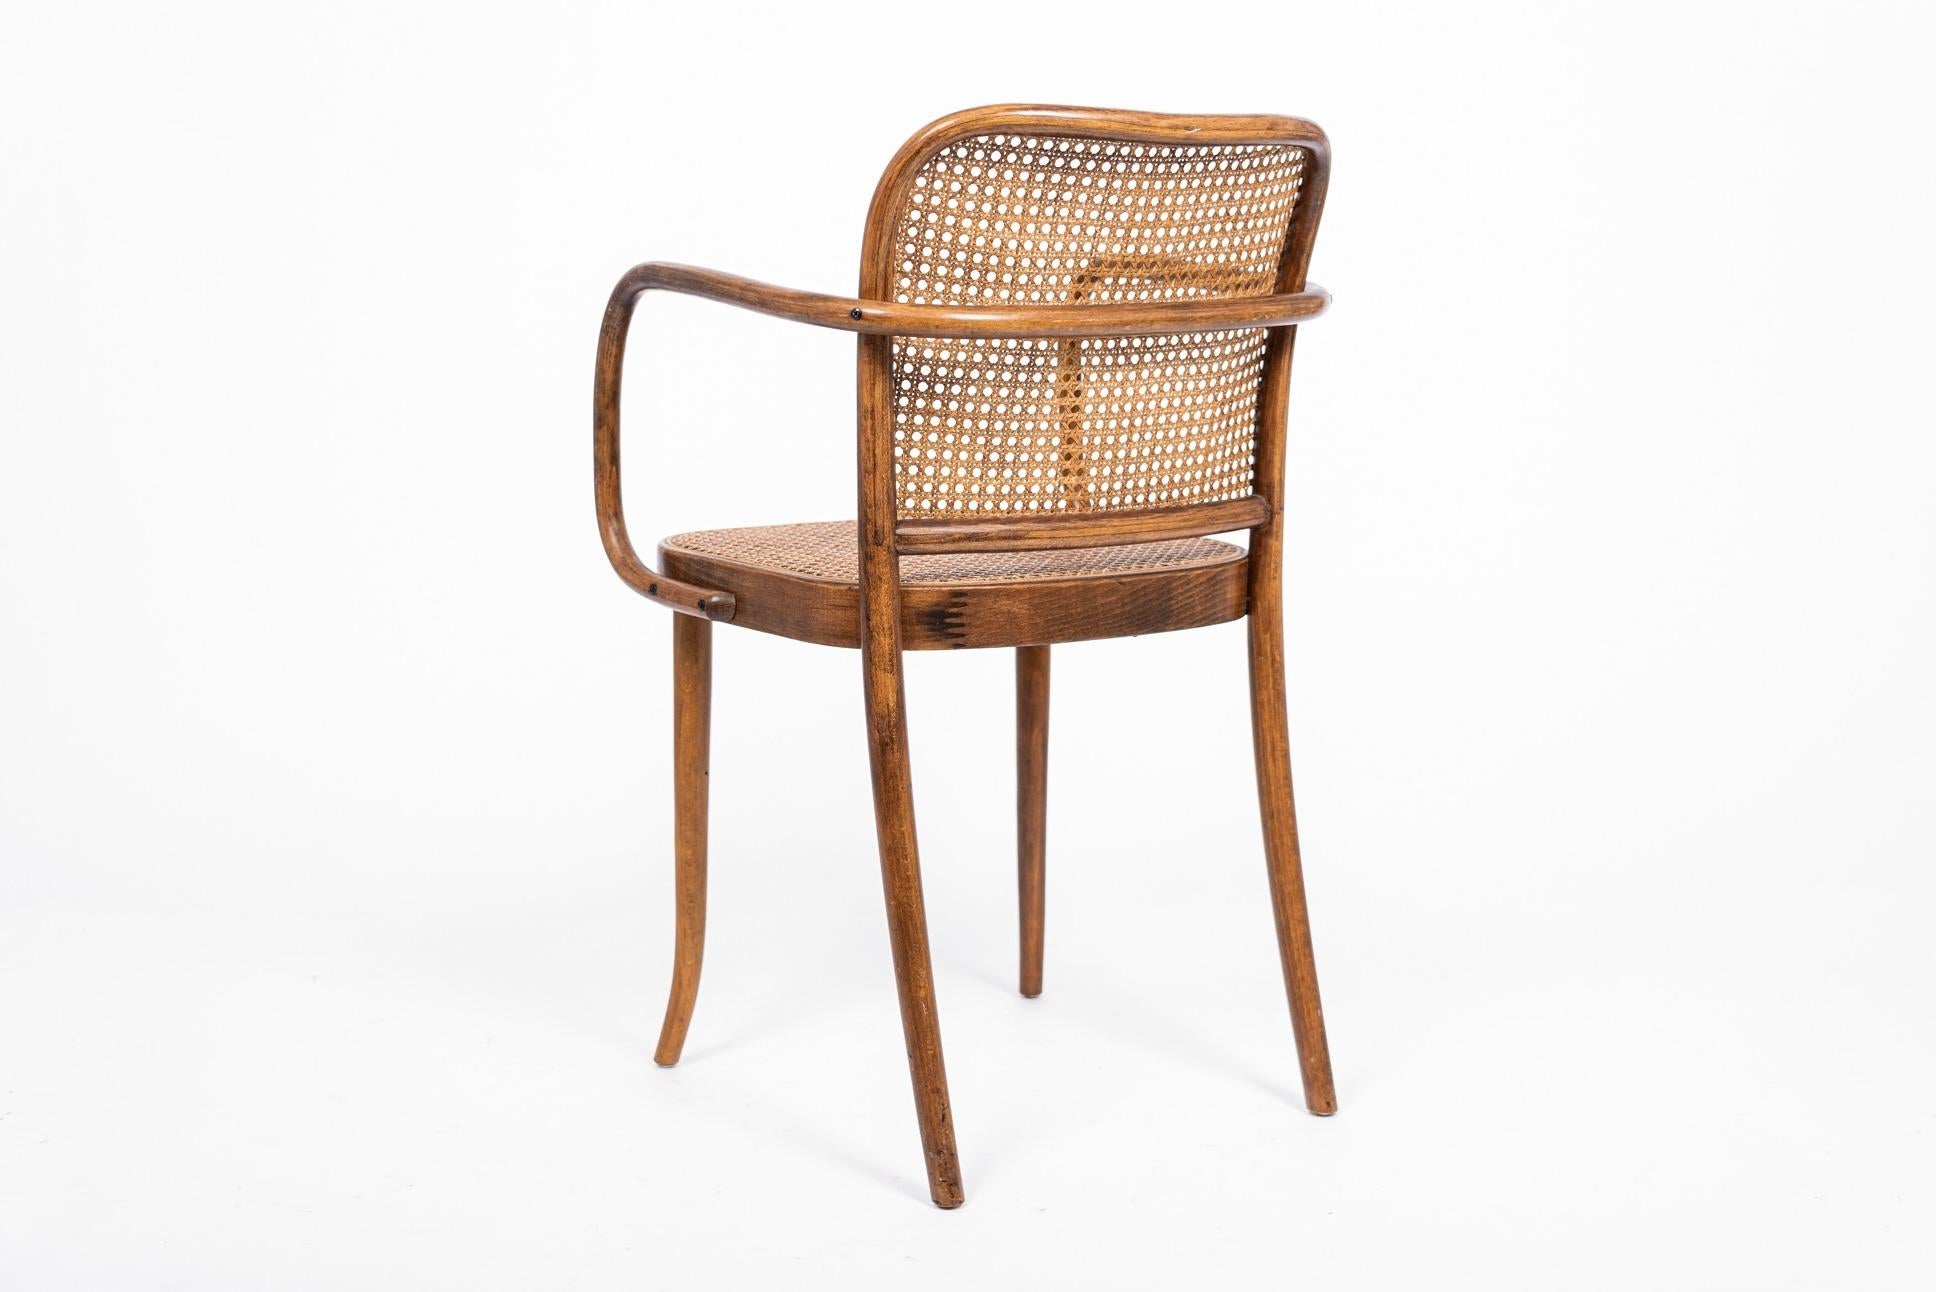 Czech Midcentury Bentwood & Cane Cafe Chair by Joseph Hoffman for Stendig